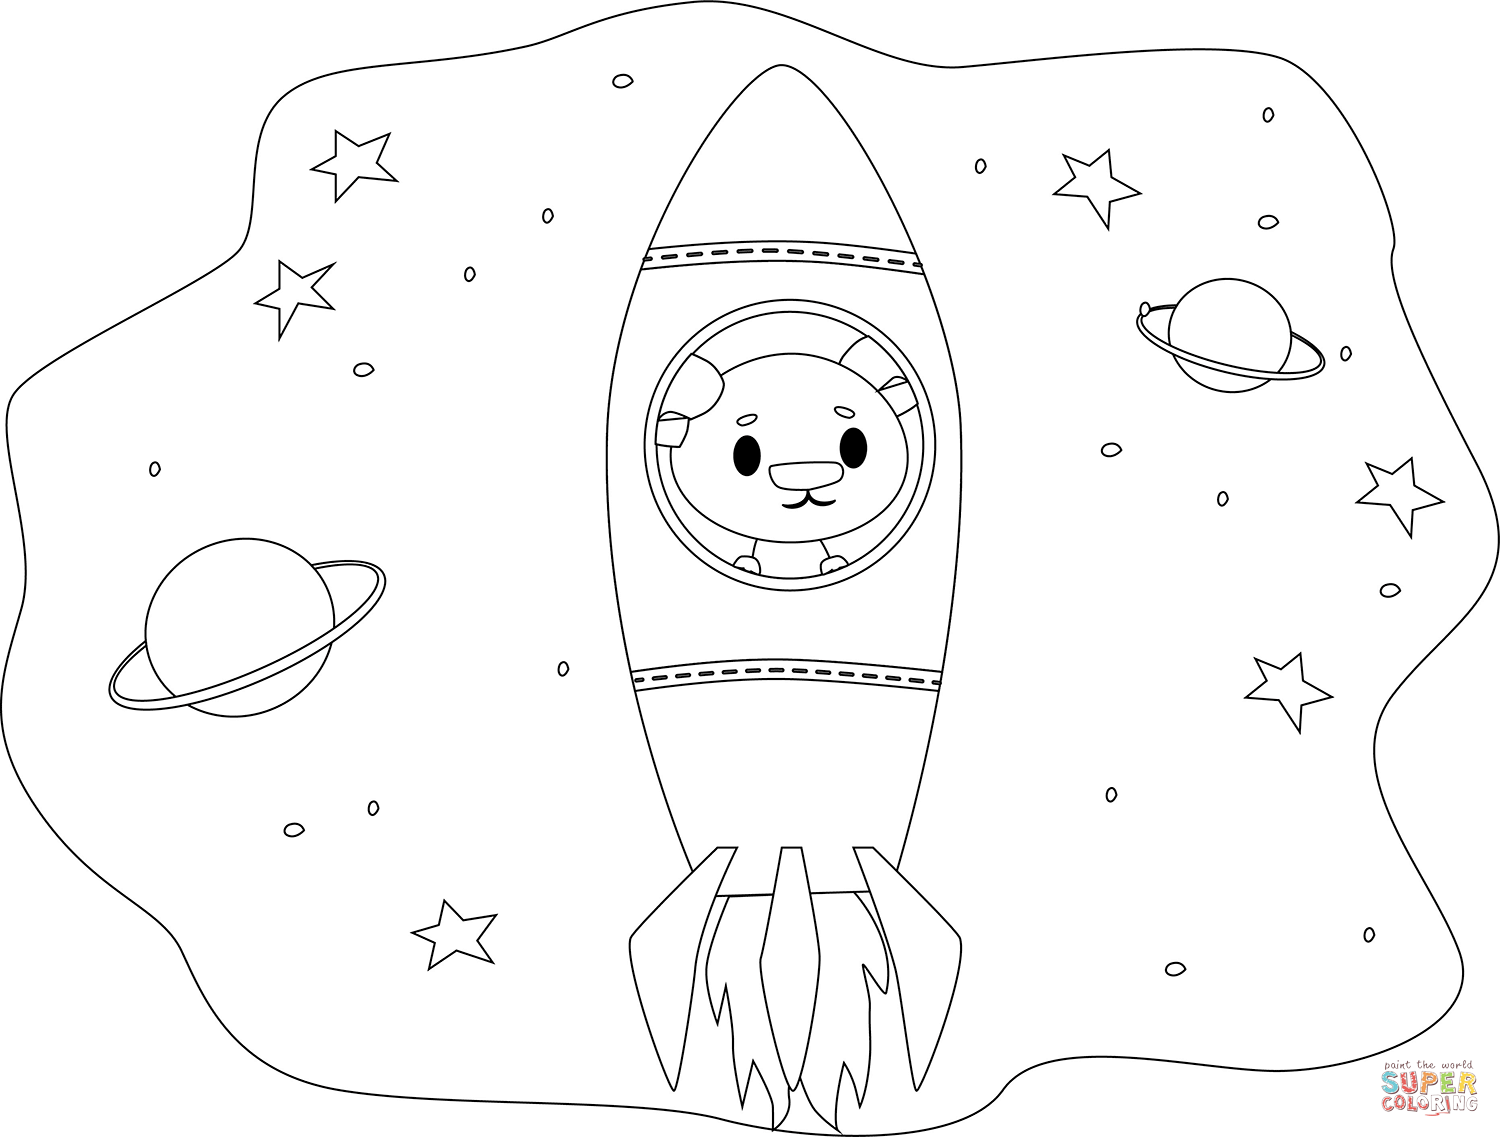 Bear in Space coloring page | Free Printable Coloring Pages